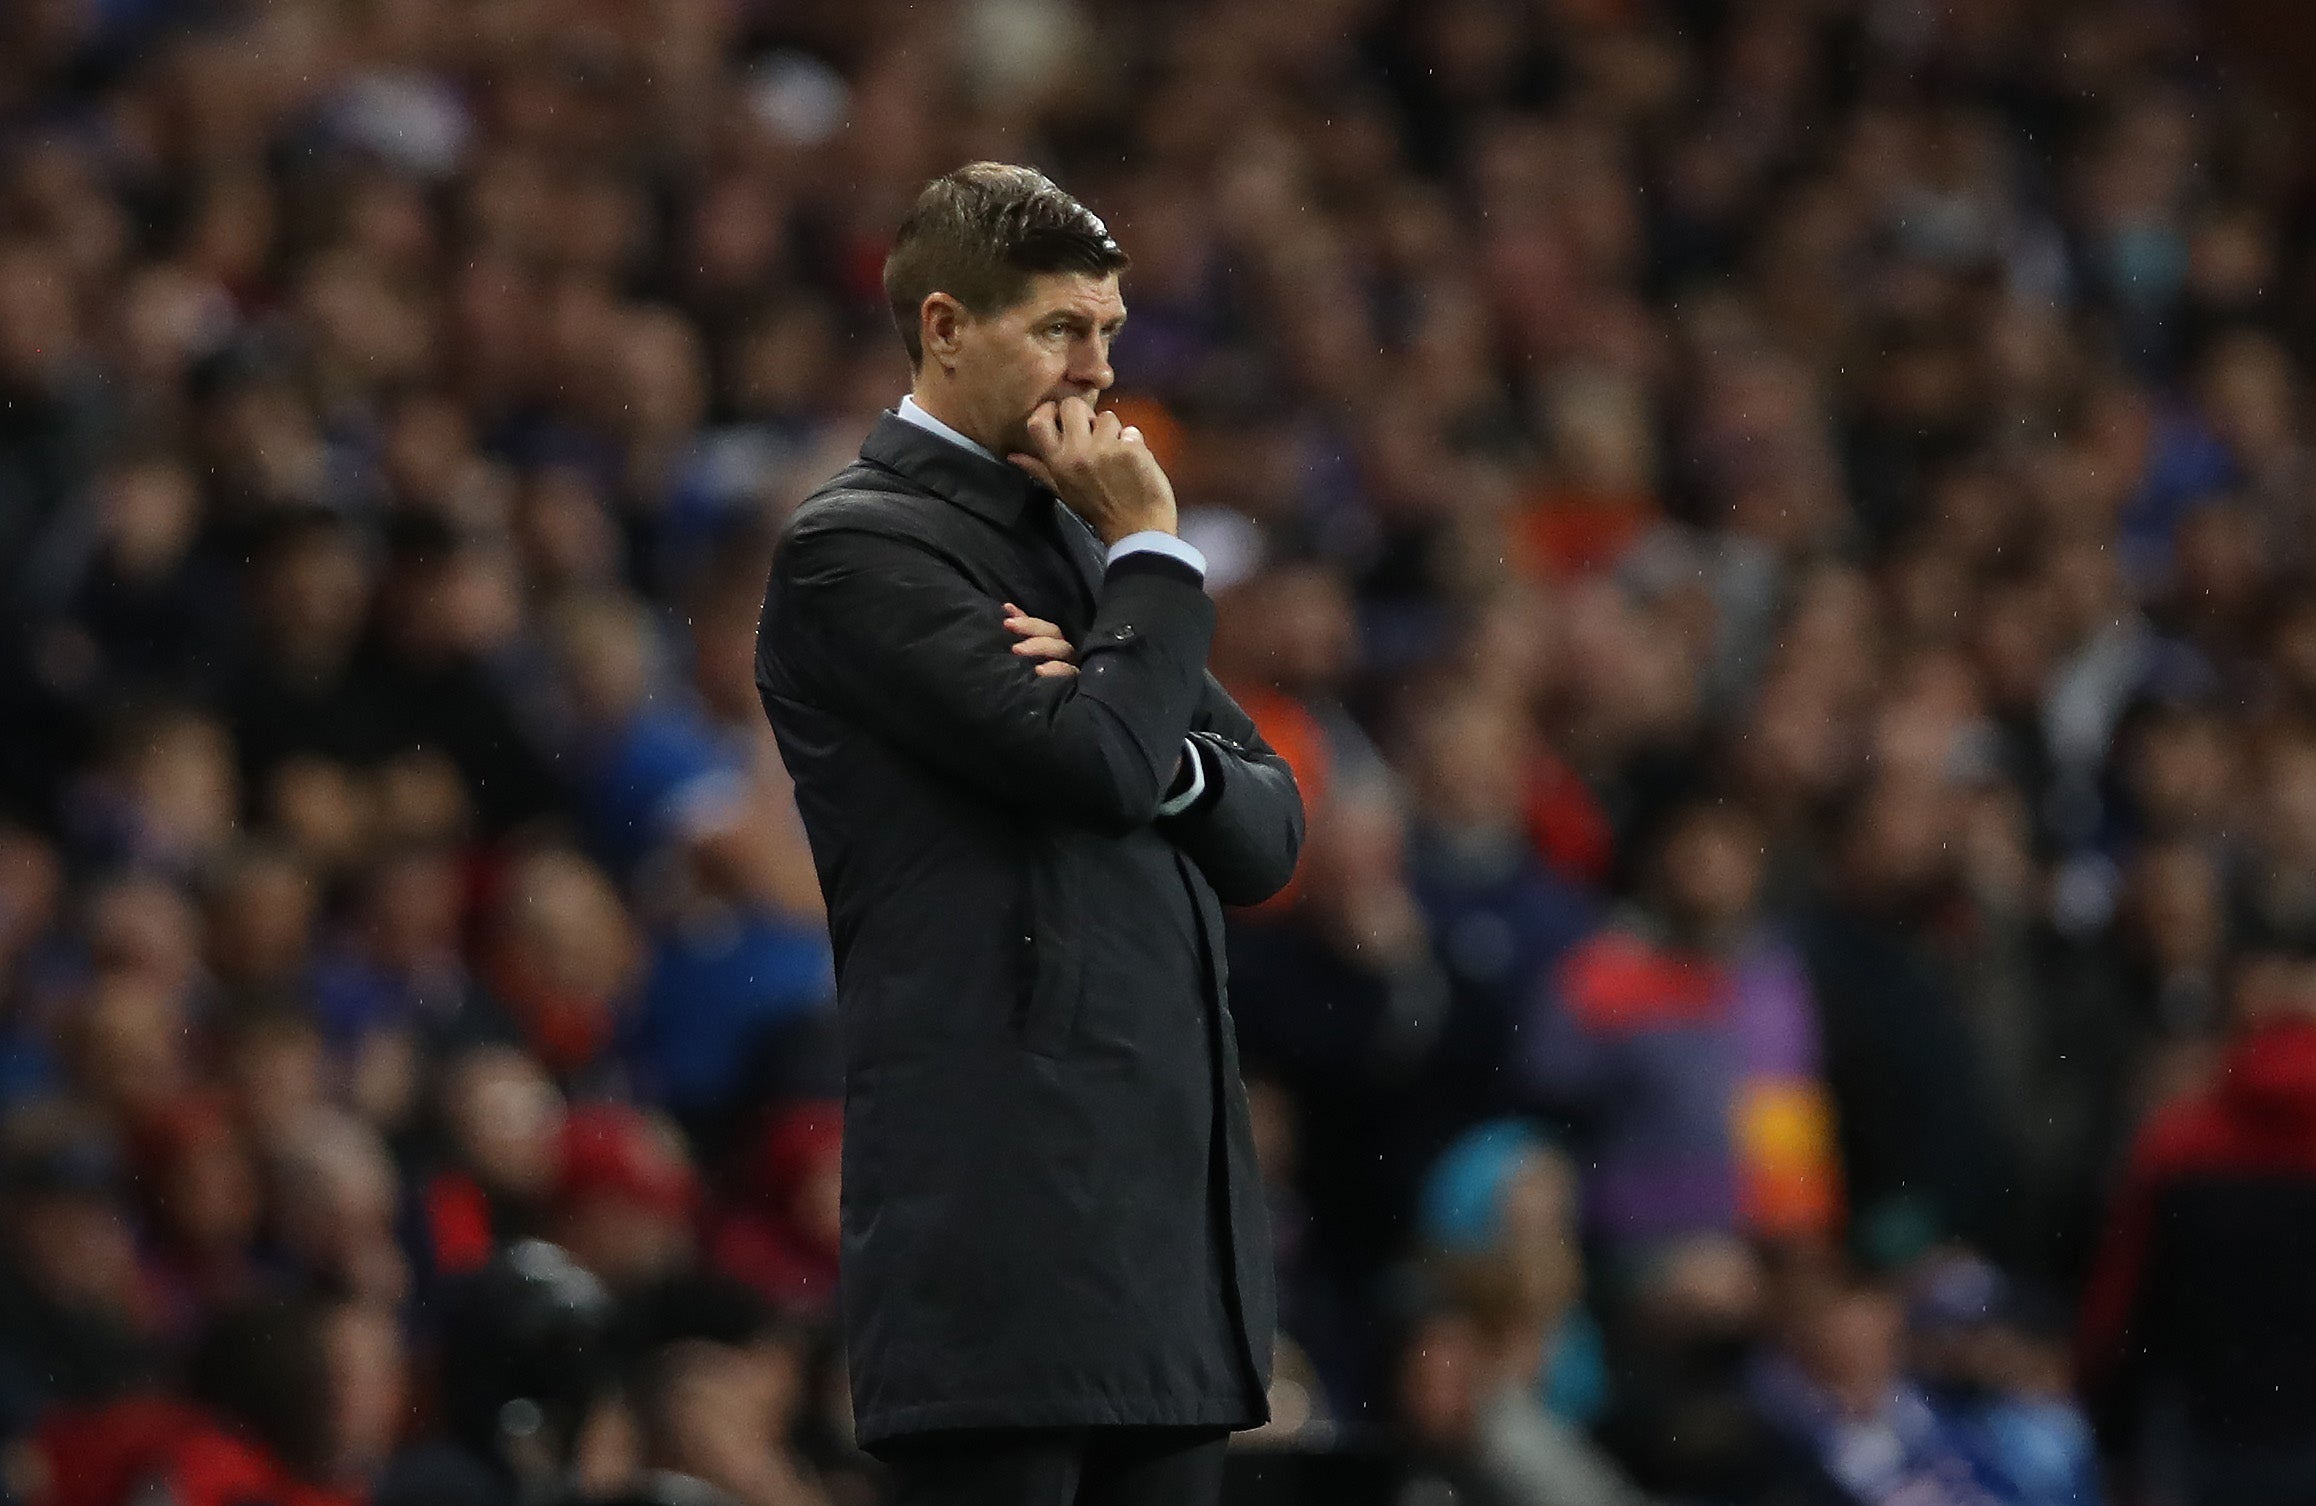 The Rangers manager wants more done to tackle racist abuse in football